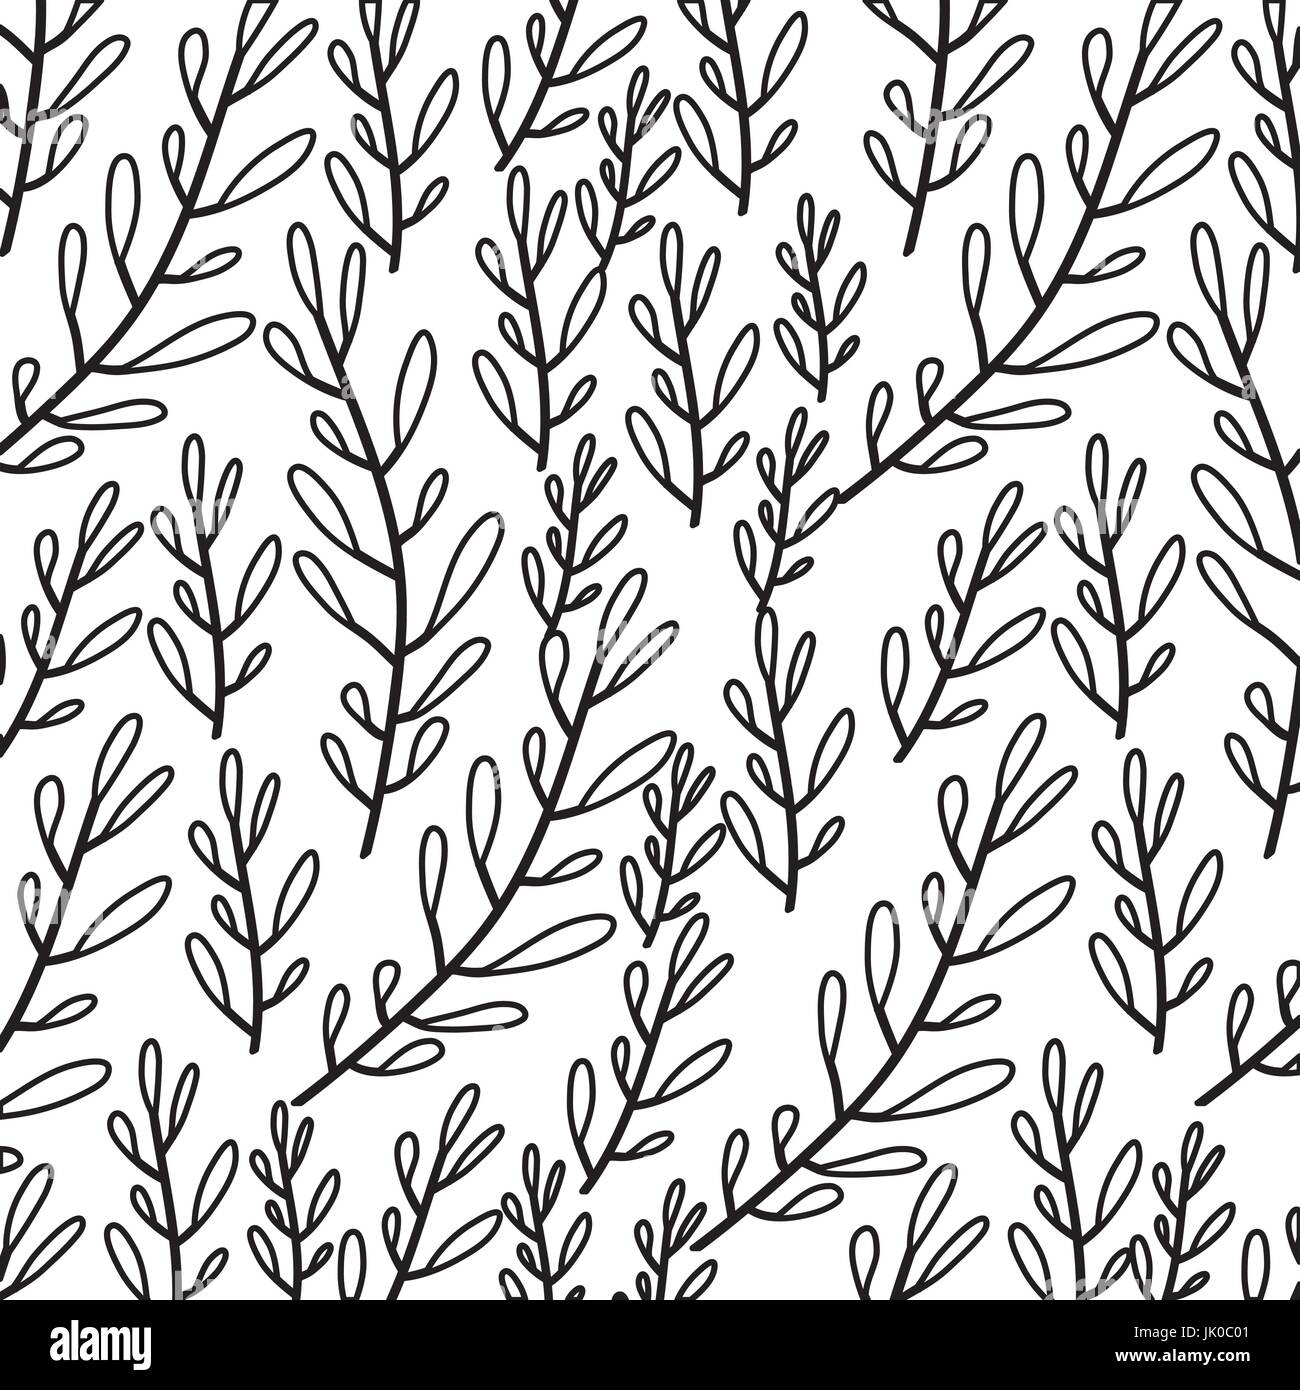 monochrome pattern of branches with ovoid leaf Stock Vector